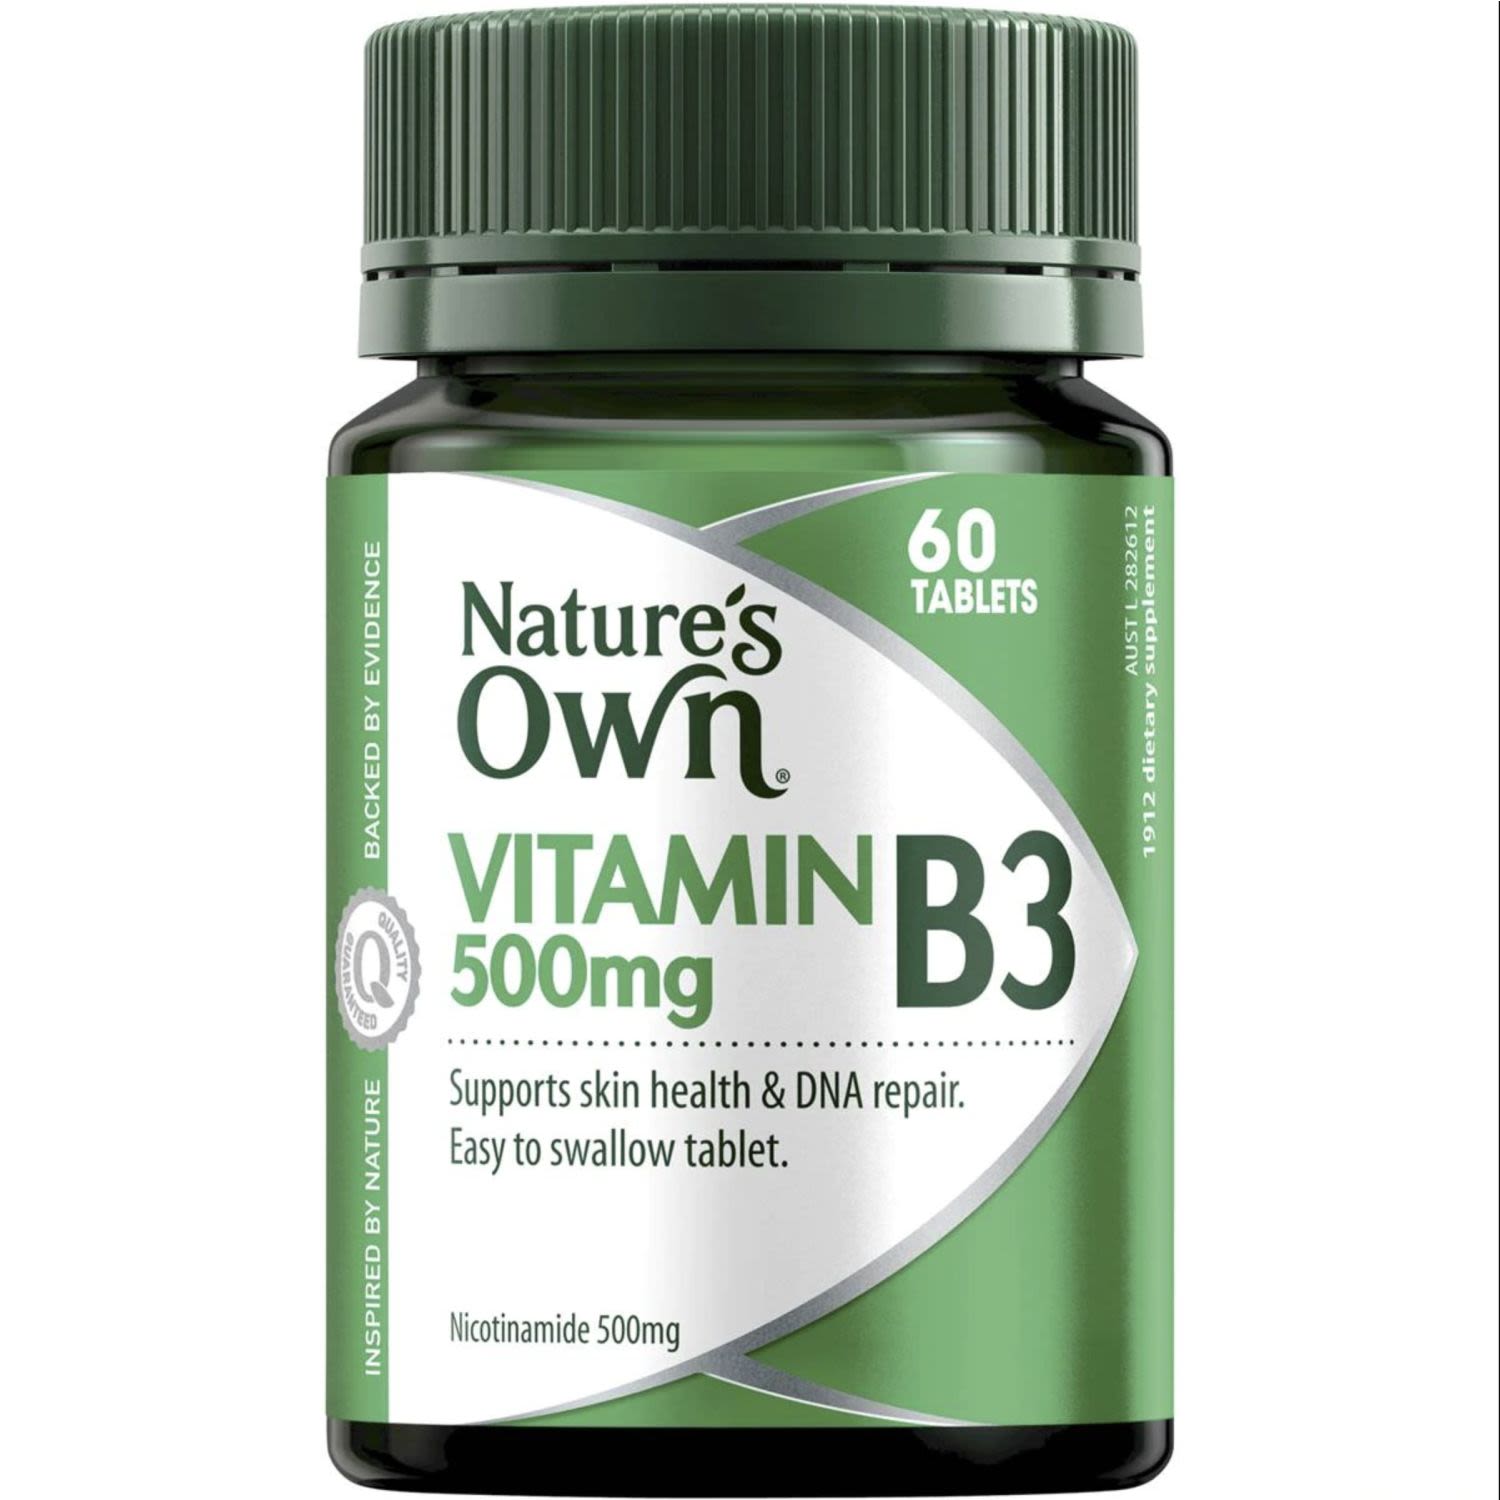 Nature's Own Vitamin B3 500mg Tablets, 60 Each